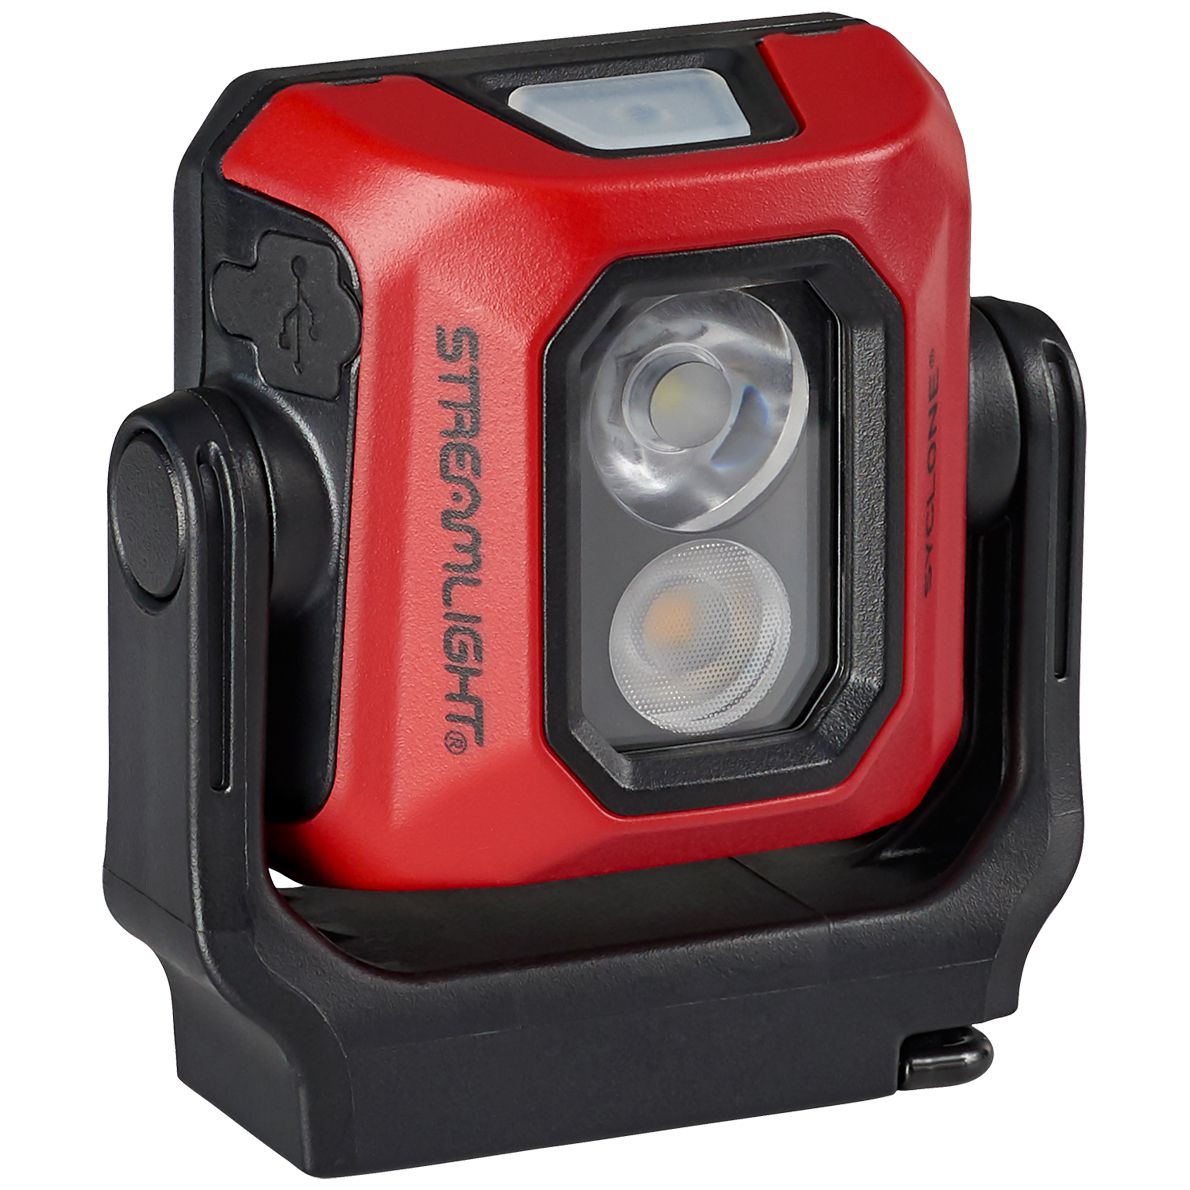 Streamlight Syclone LED Work Light - Rechargeable & Waterproof